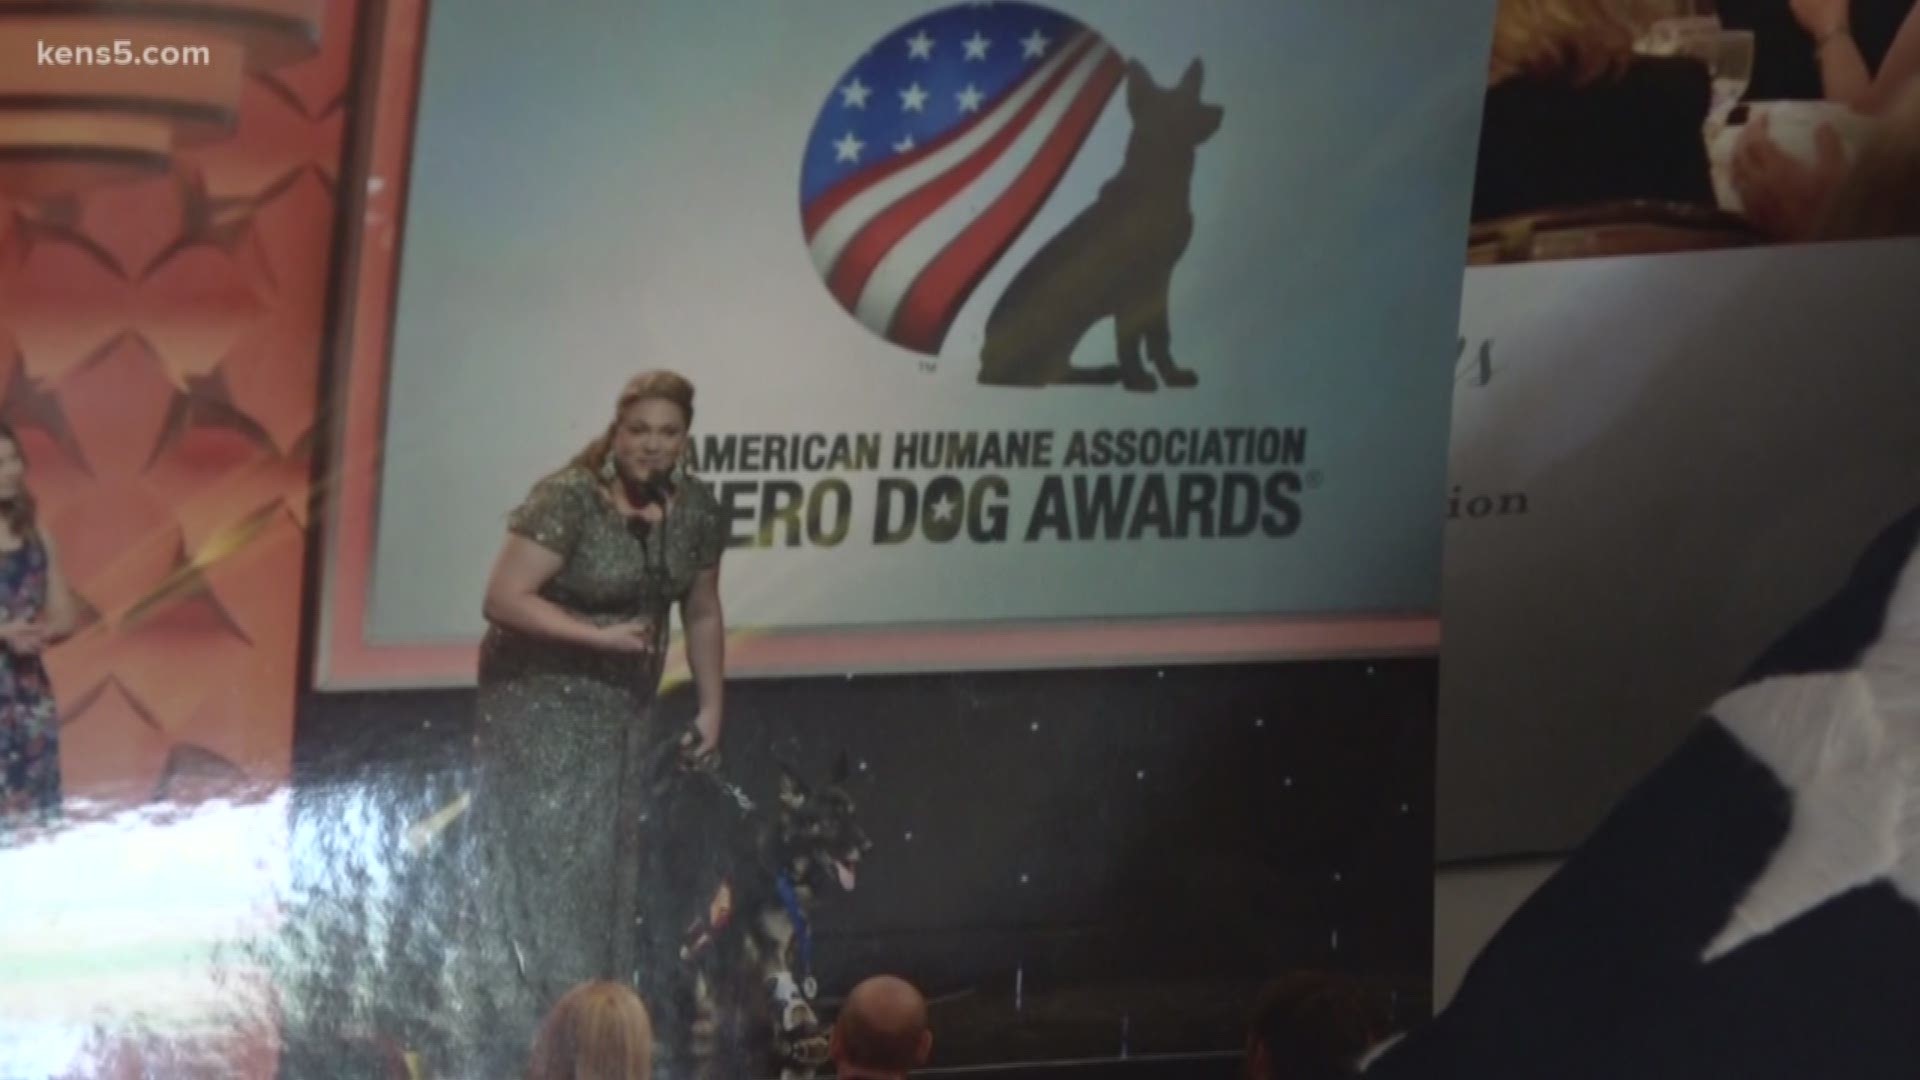 Sgt. Rambo was a three-legged hero who fought for military dogs' rights, raised awareness about canine members and supported veterans across the country. Eyewitness News reporter Sharon Ko explains.